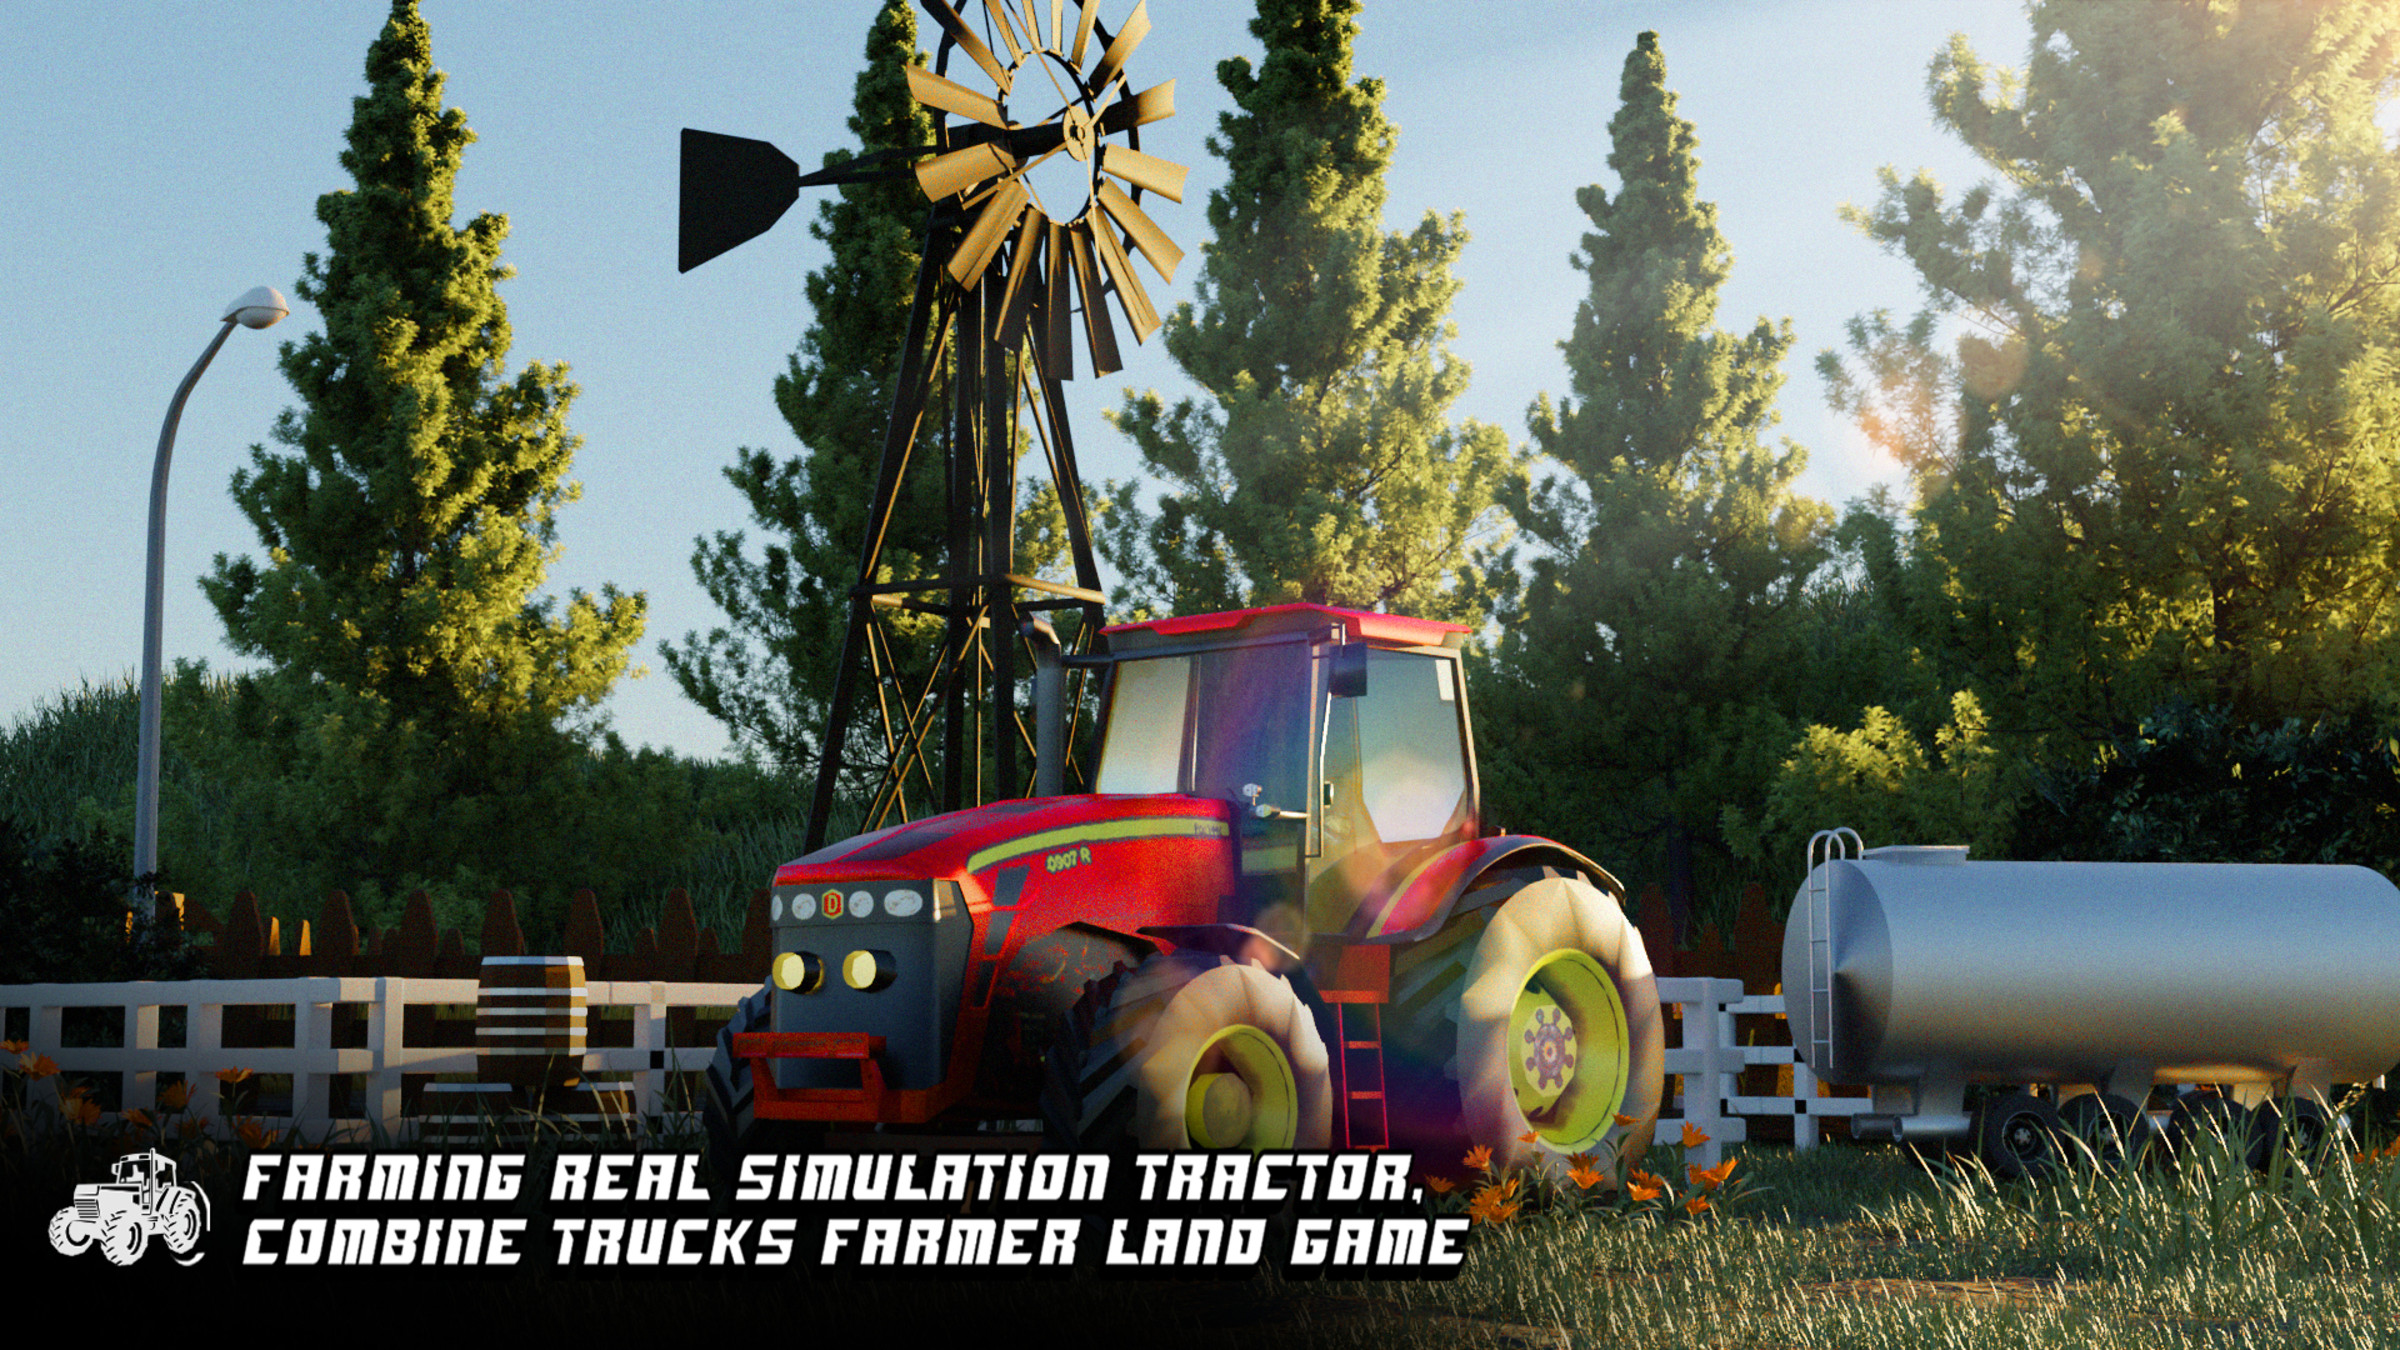 https://assets.nintendo.com/image/upload/c_fill,w_1200/q_auto:best/f_auto/dpr_2.0/ncom/en_US/games/switch/f/farming-real-simulation-tractor-combine-trucks-farmer-land-game-switch/